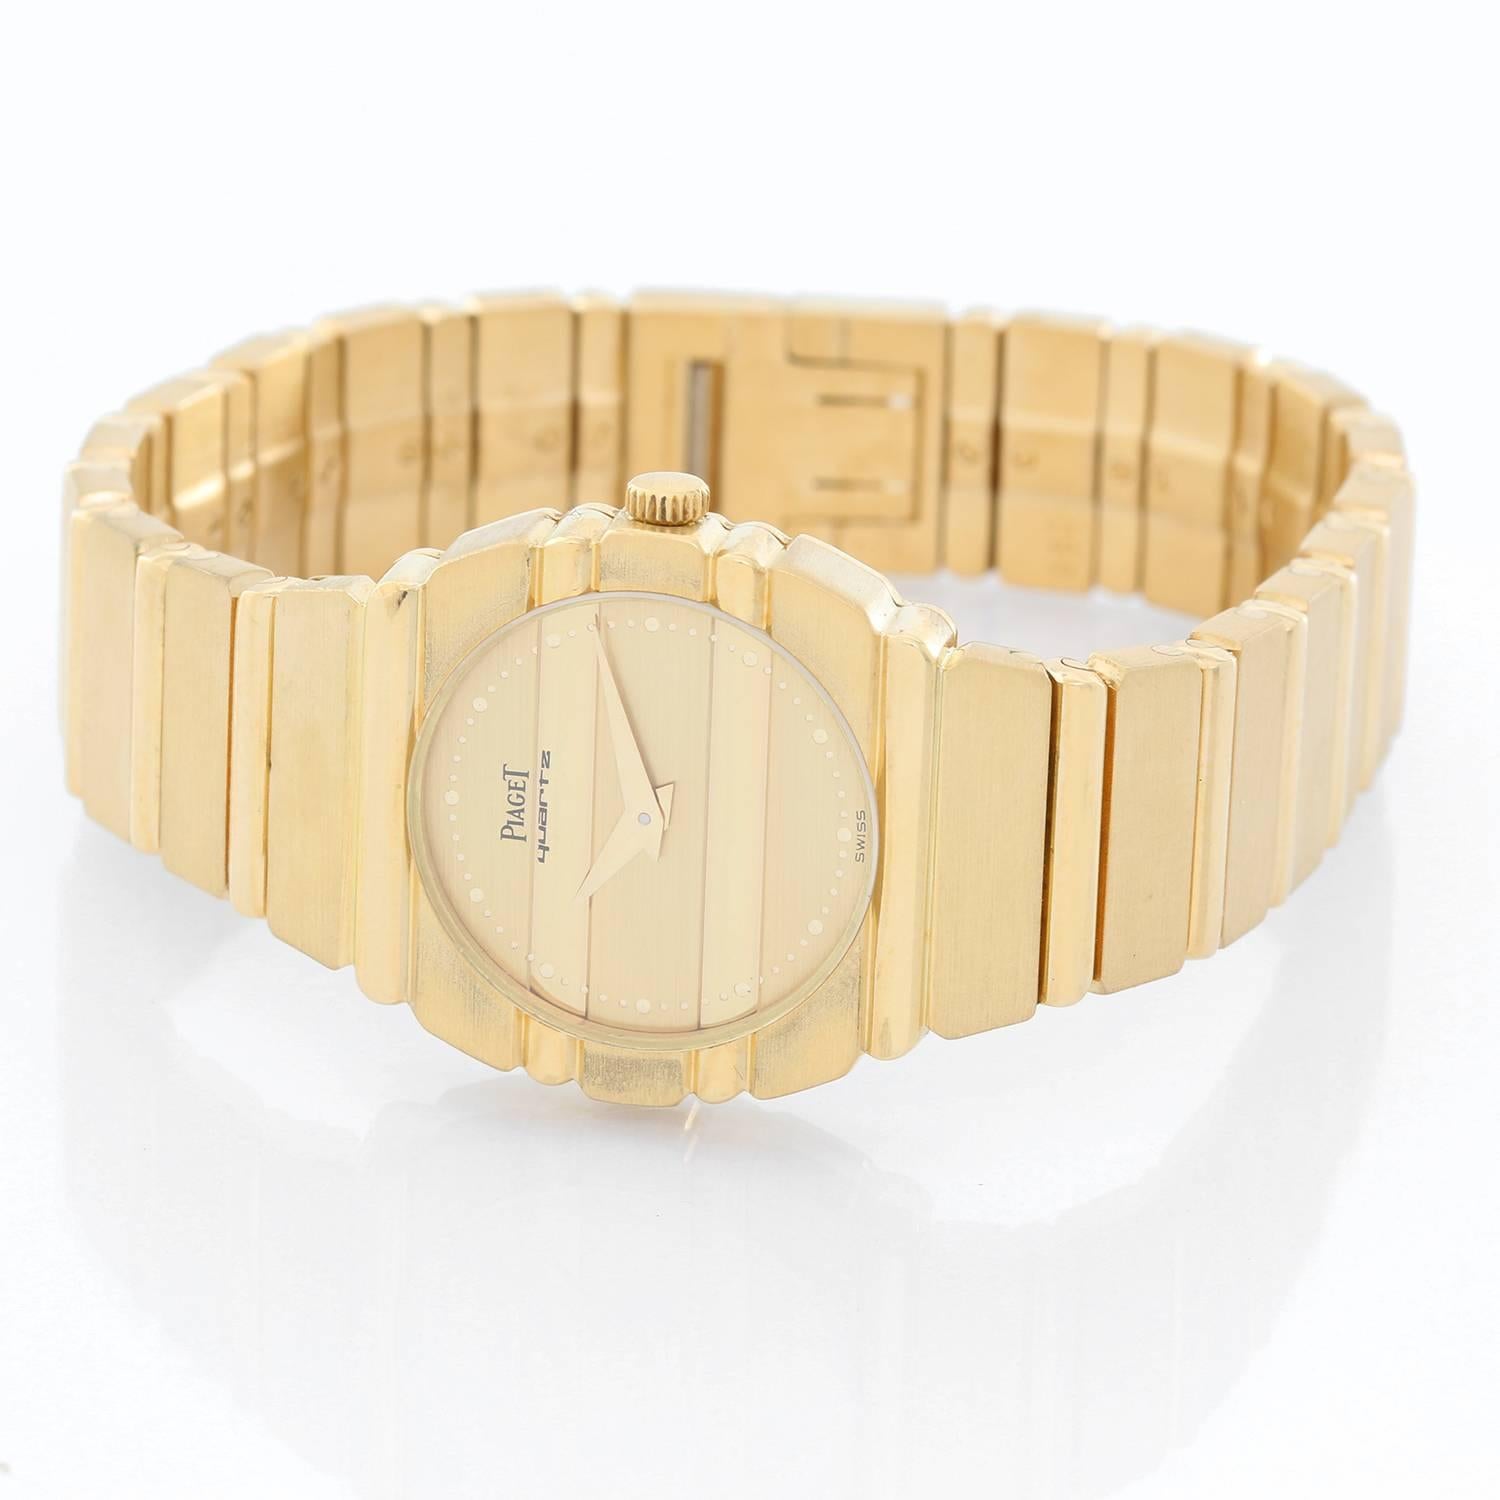 Piaget Polo Yellow Gold Watch Ladies -  Quartz. 18K Yellow gold ( 23 mm ). Gold dial. 18K Yellow Gold Bracelet. Pre-owned with custom box. Will fit a 6 inch wrist.